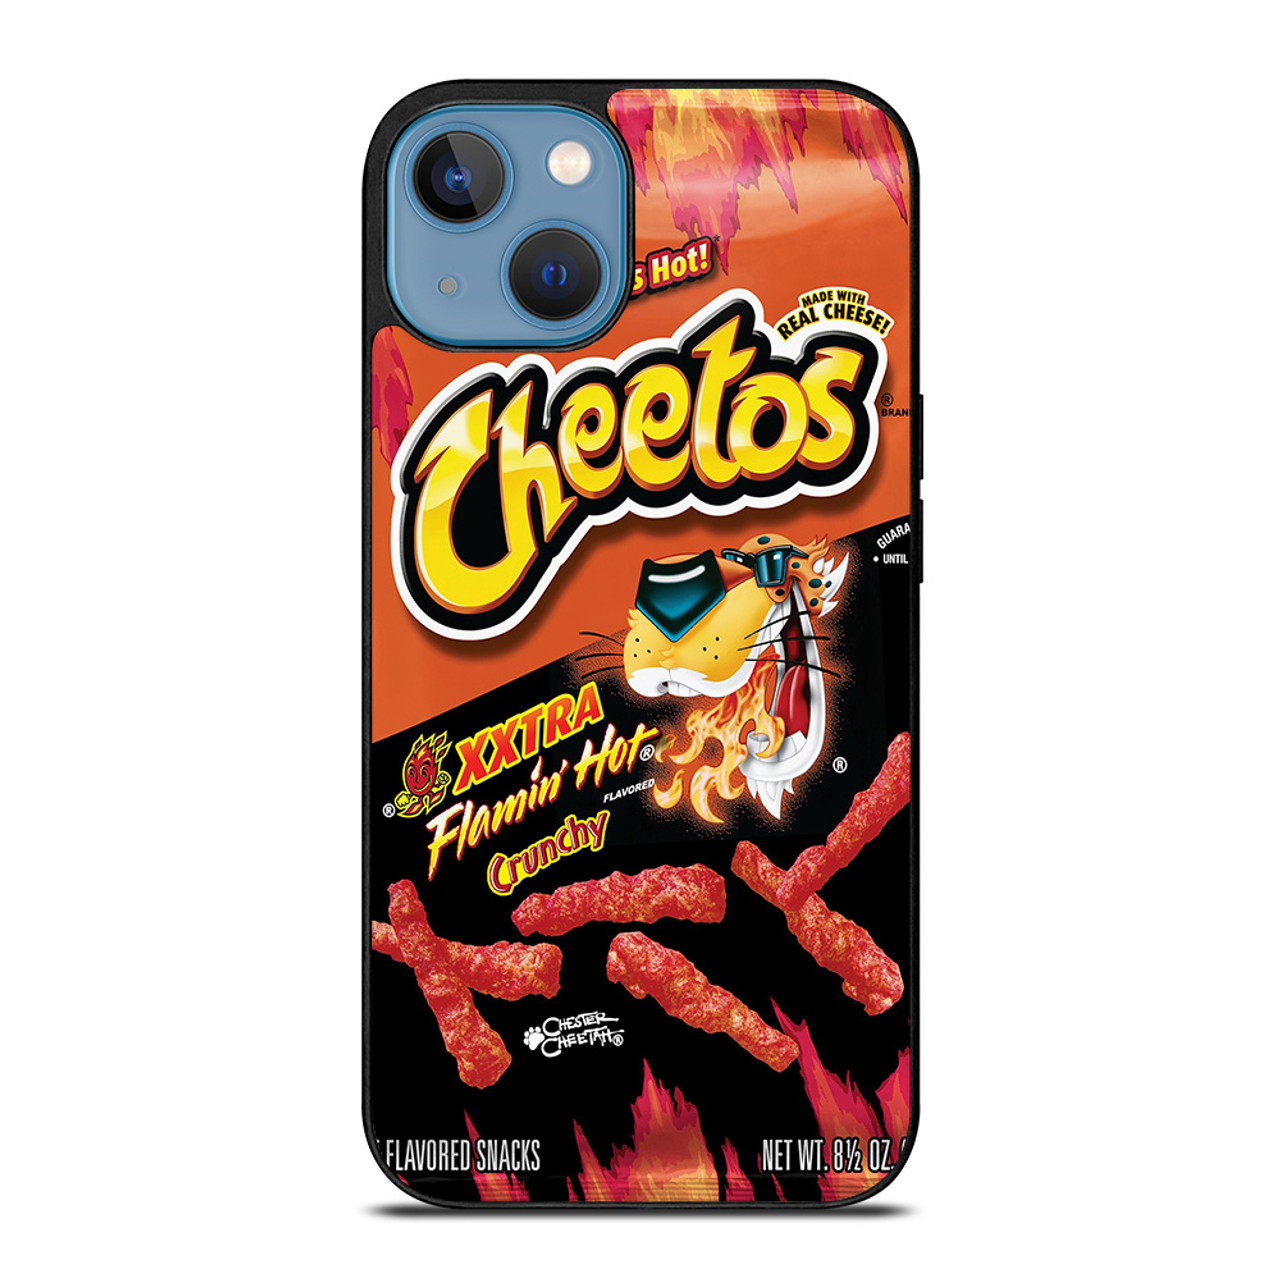 Cheetos® Xxtra Flamin Hot® Crunchy Cheese Flavored Snacks